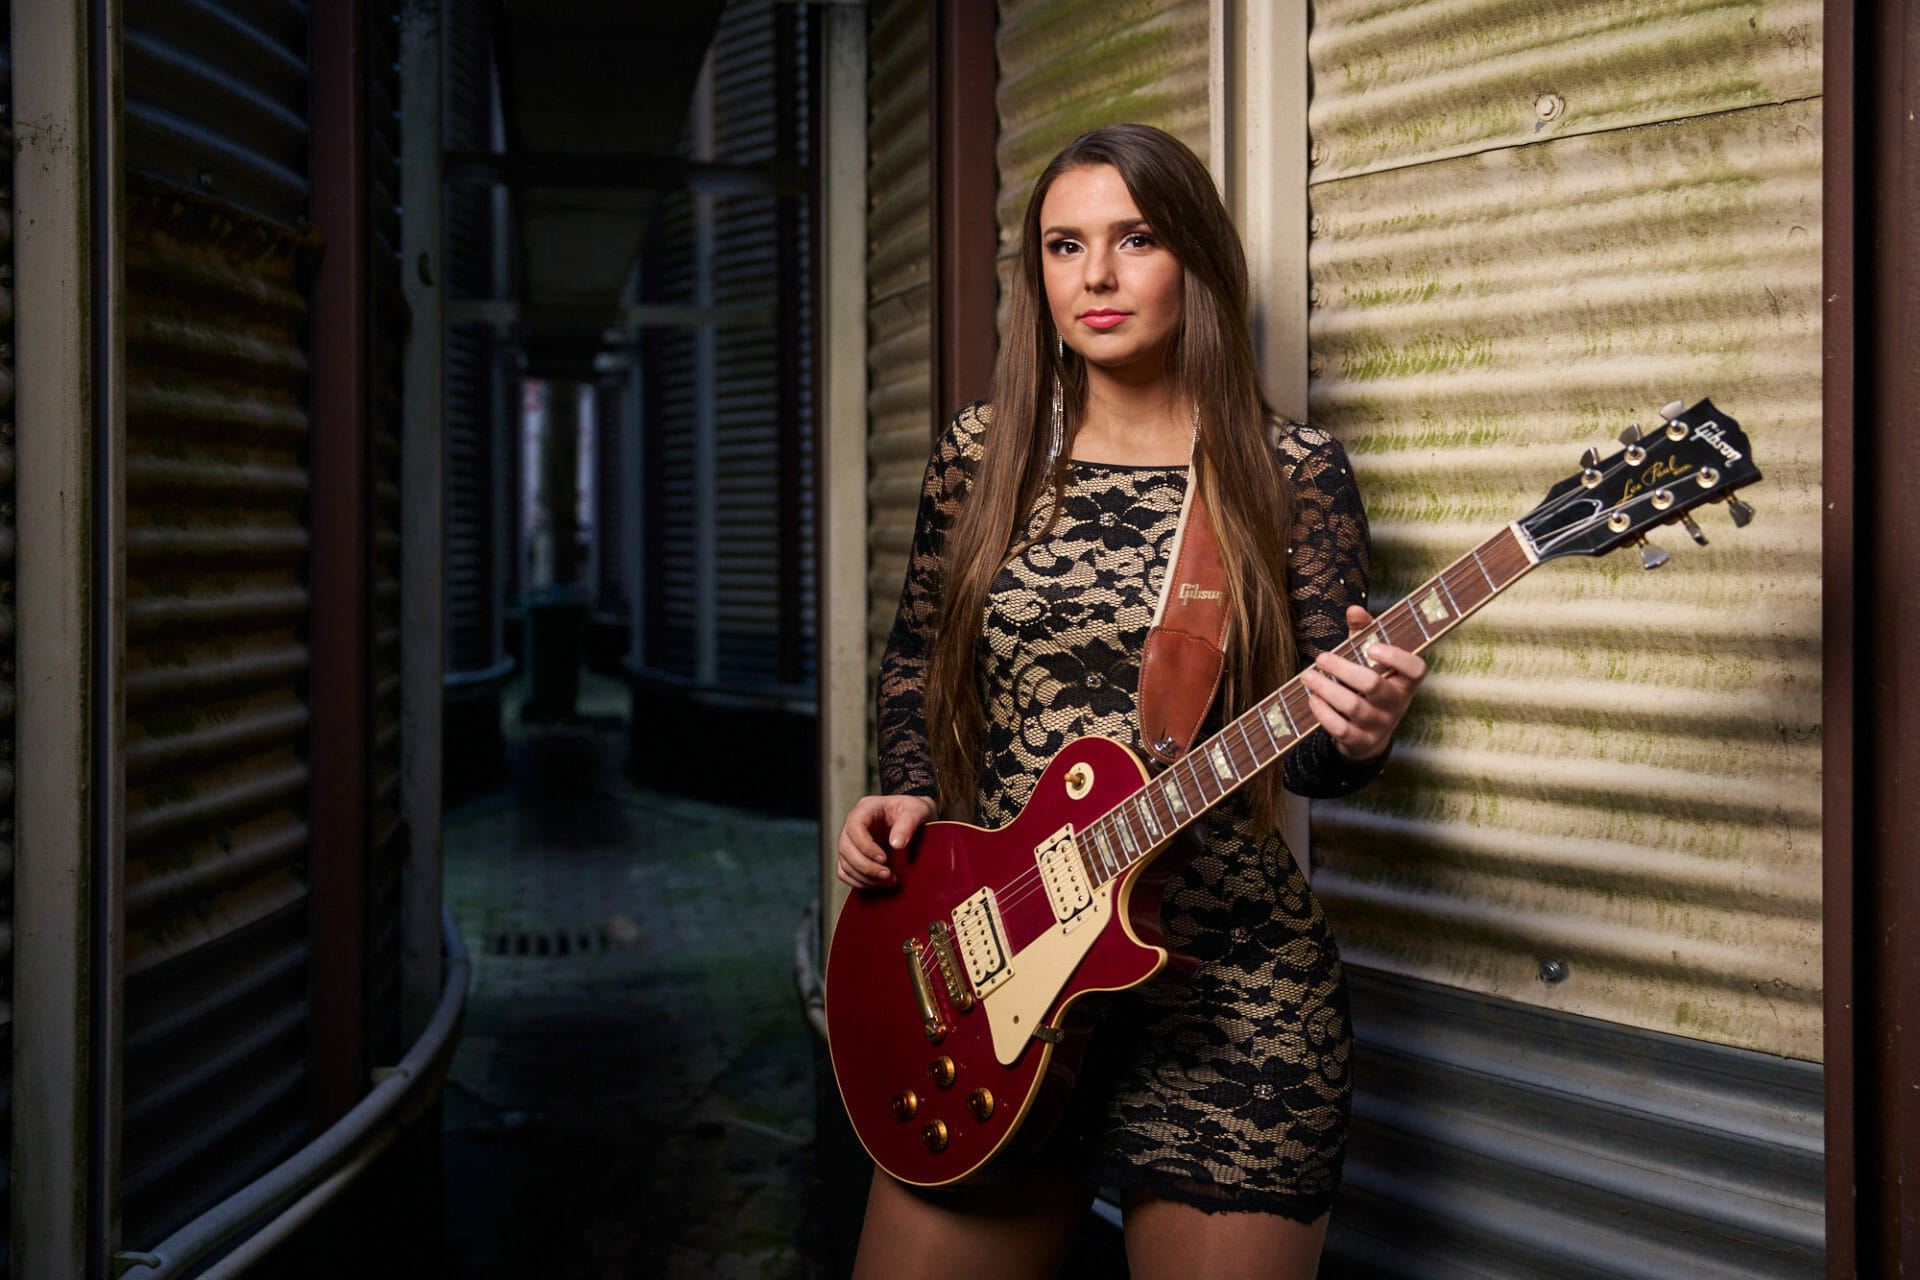 Song Premiere: Ally Venable with Buddy Guy “Texas Louisiana”